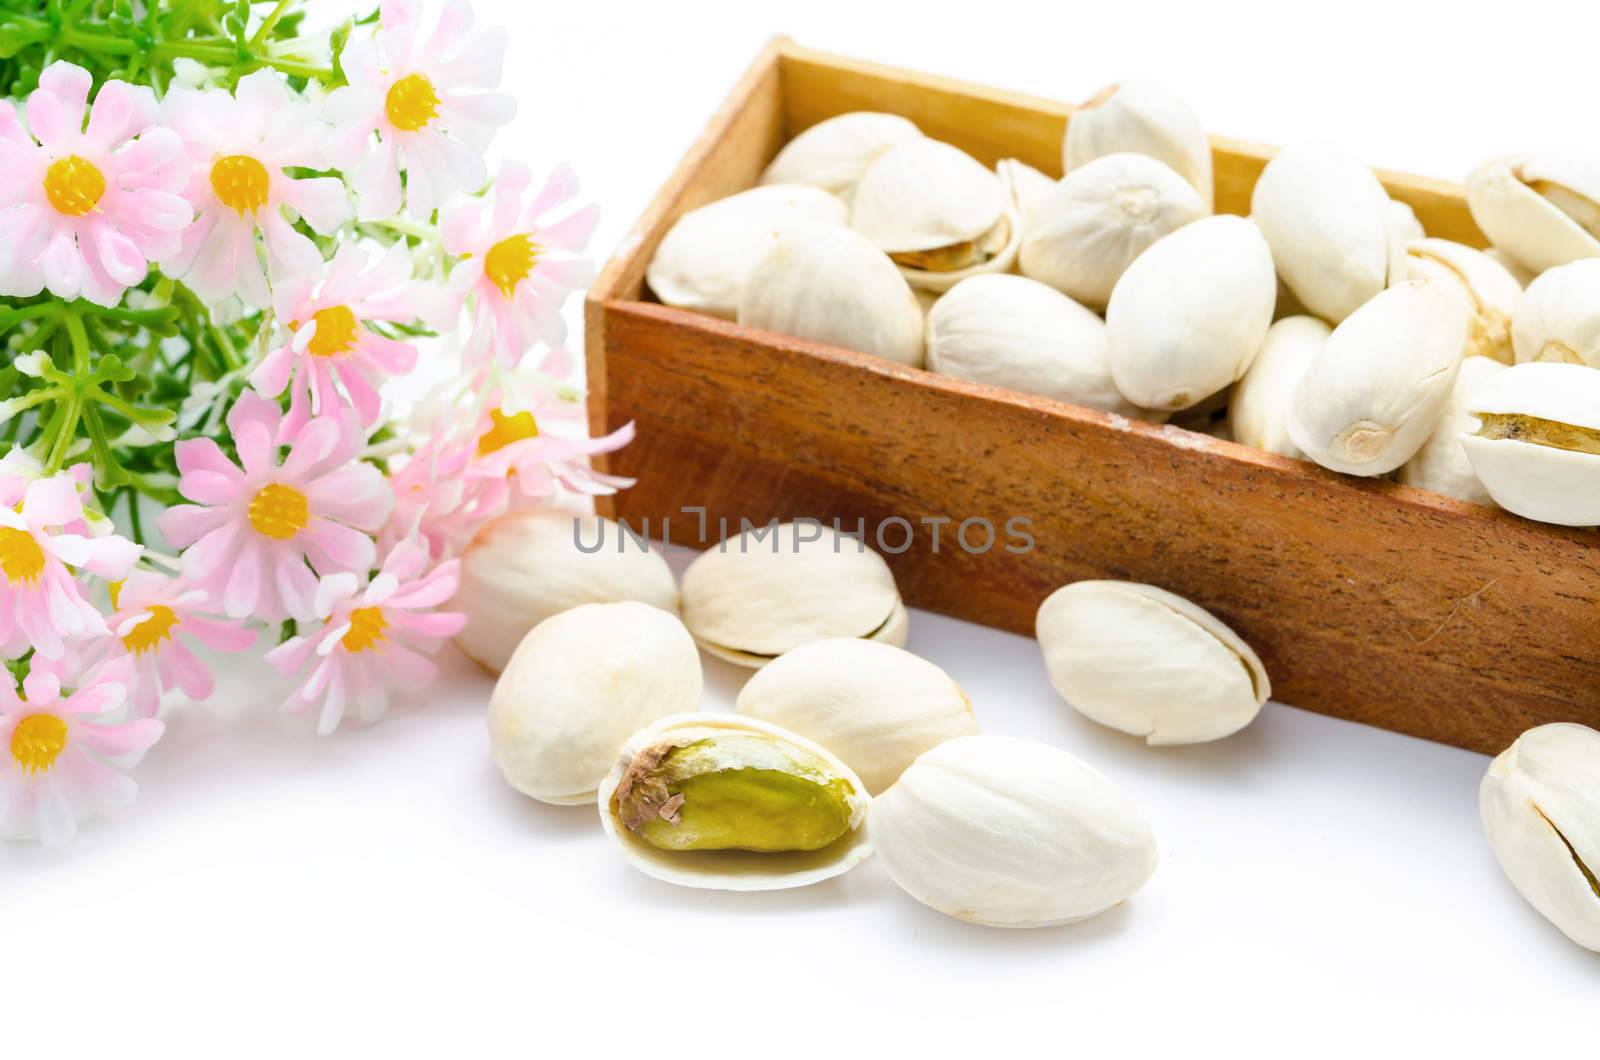 Pistachio nuts in wooden box with flower. by Gamjai